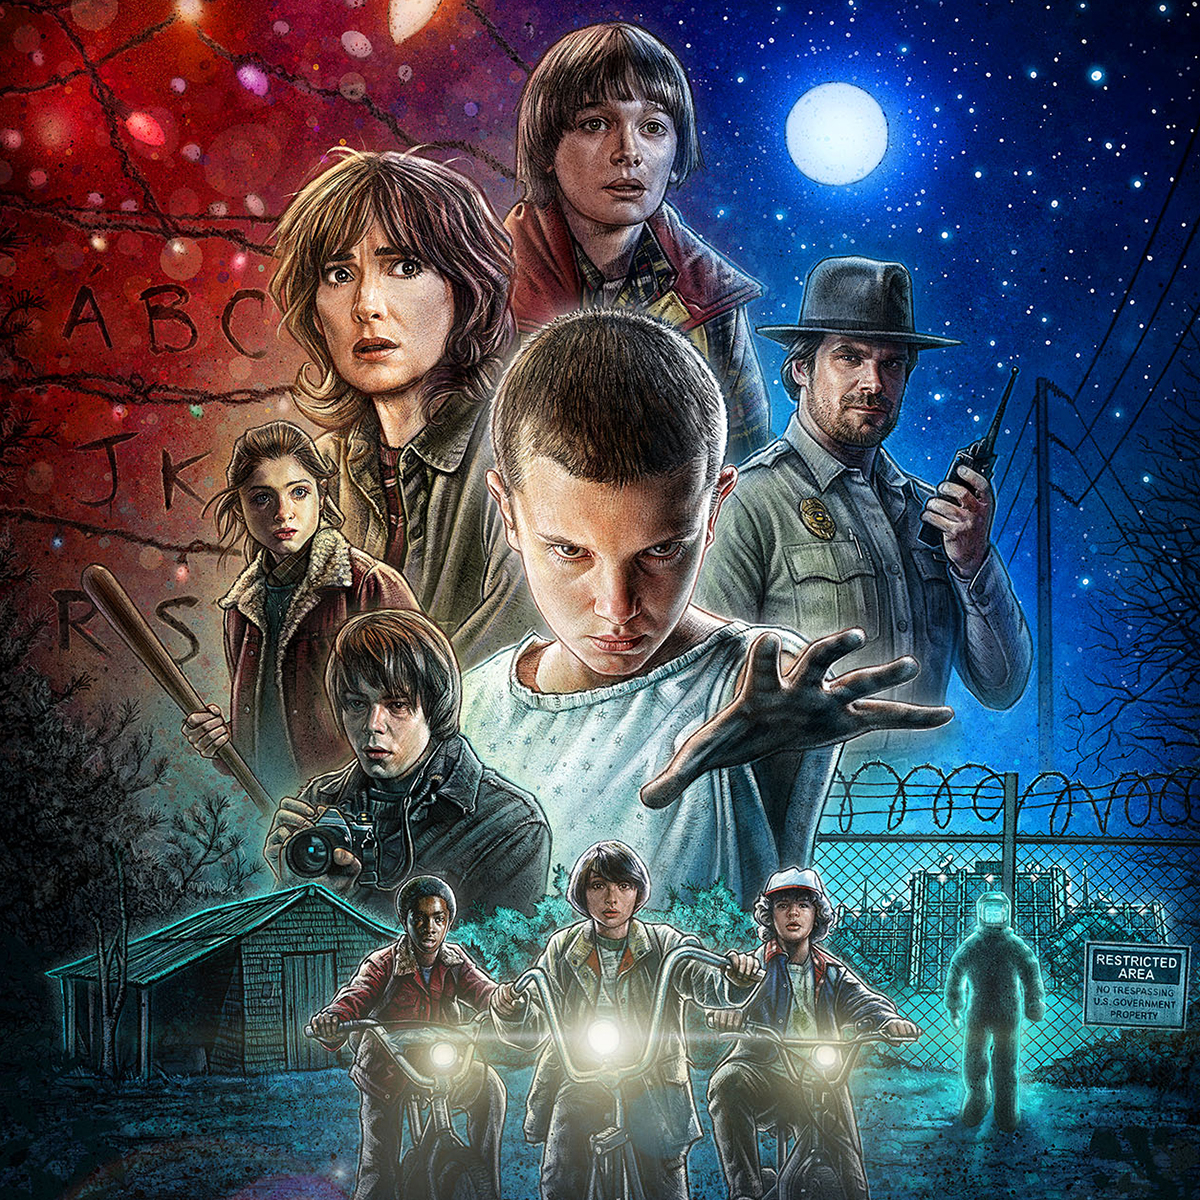 Stranger Things': Filming Secrets and Fun Facts From the Set